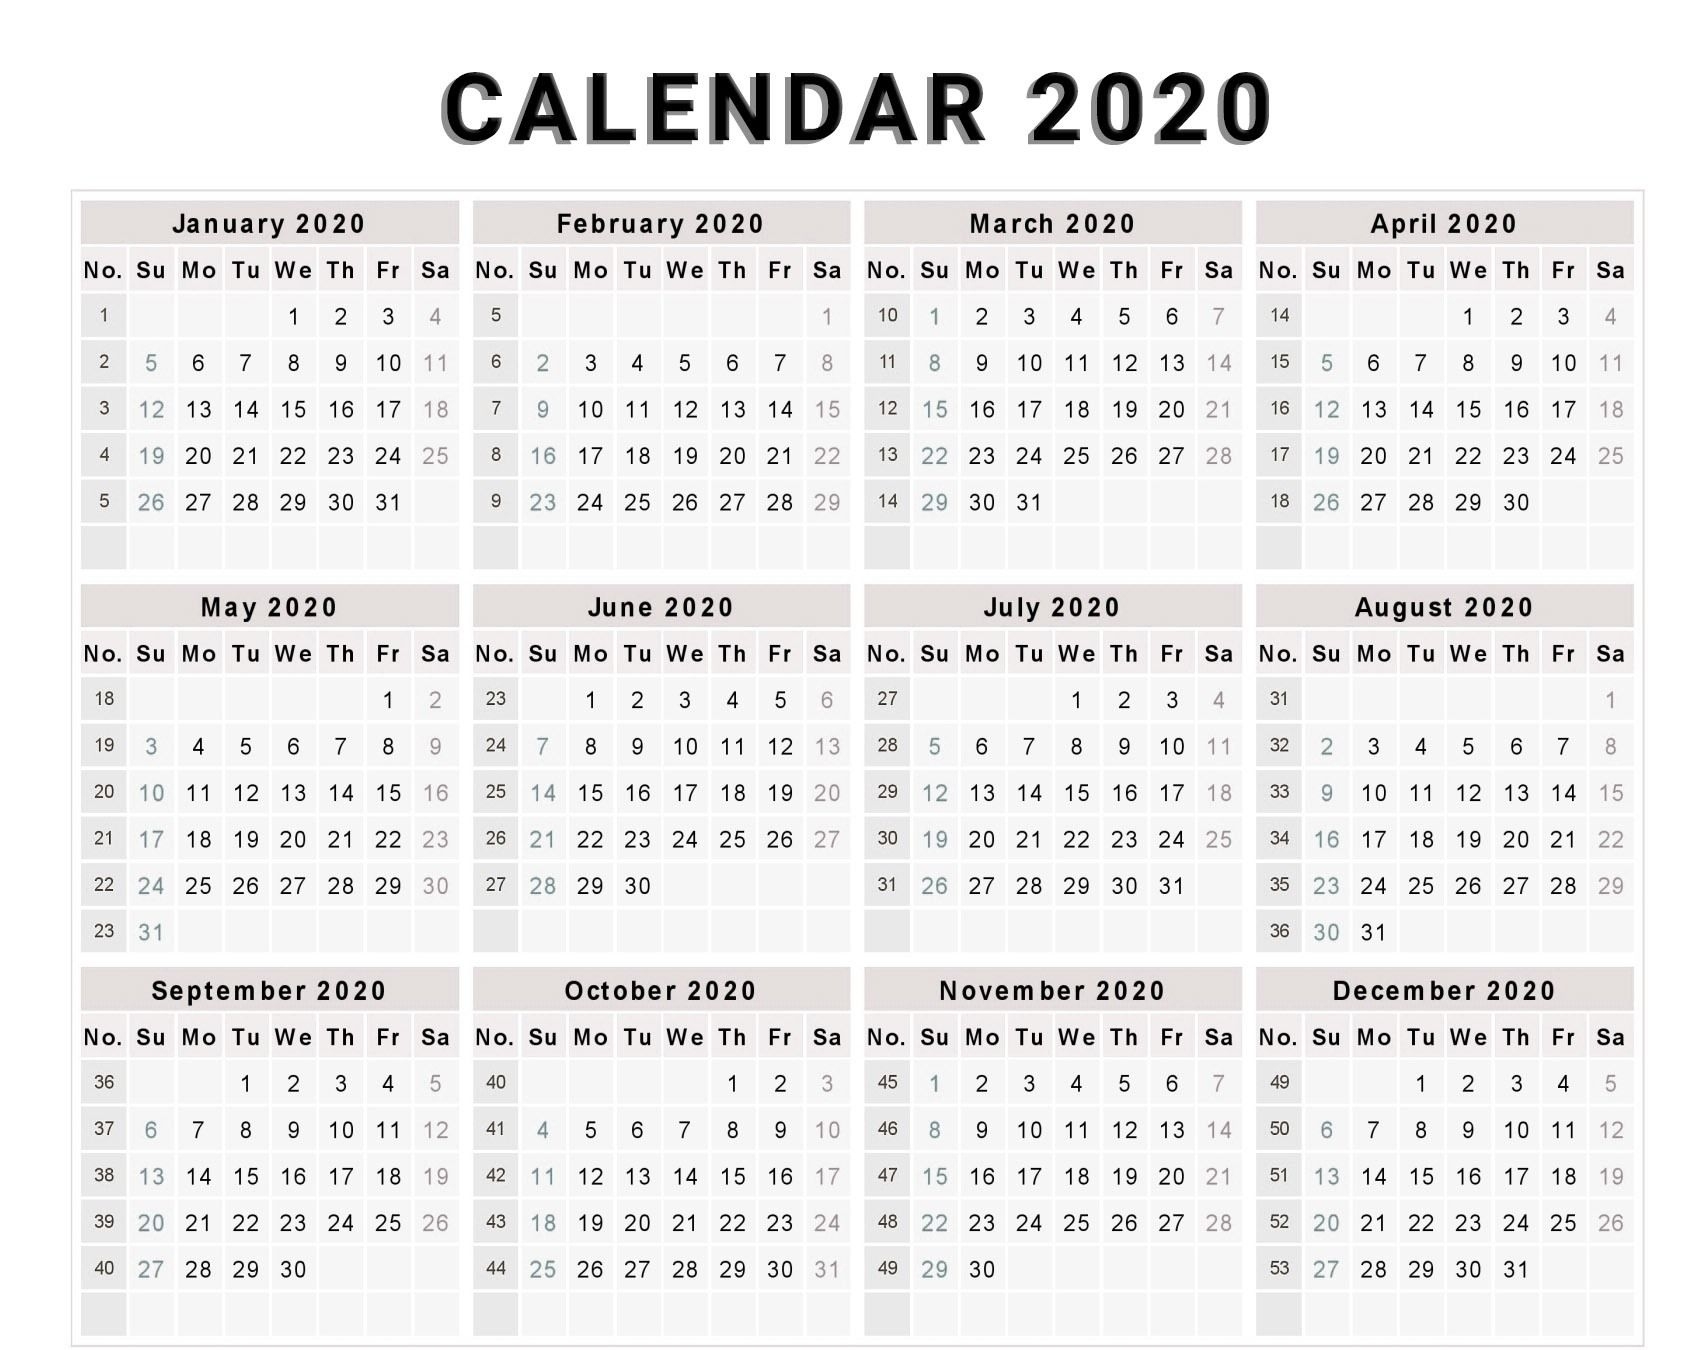 2020 Calendar Printable With Numbered Days | Monthly Dashing 2020 Calendar With Days Numbered